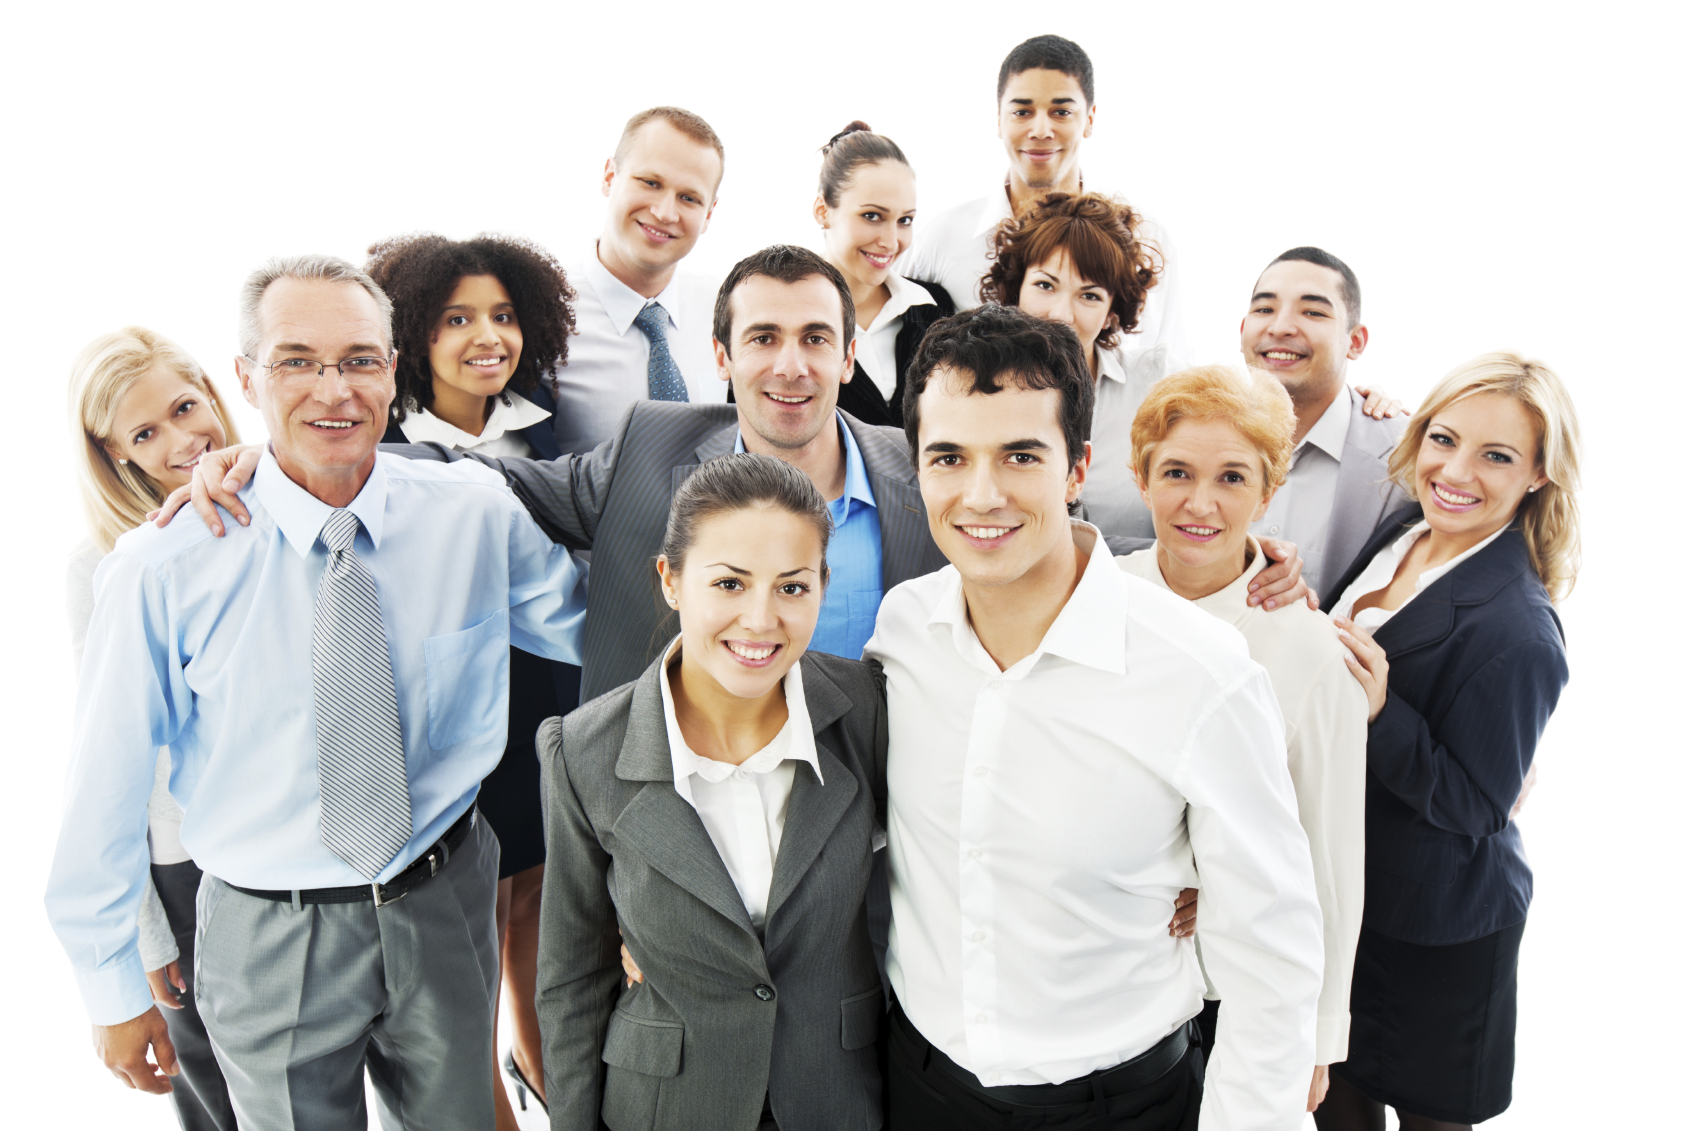 istock_crowd-of-young-professionals.jpg